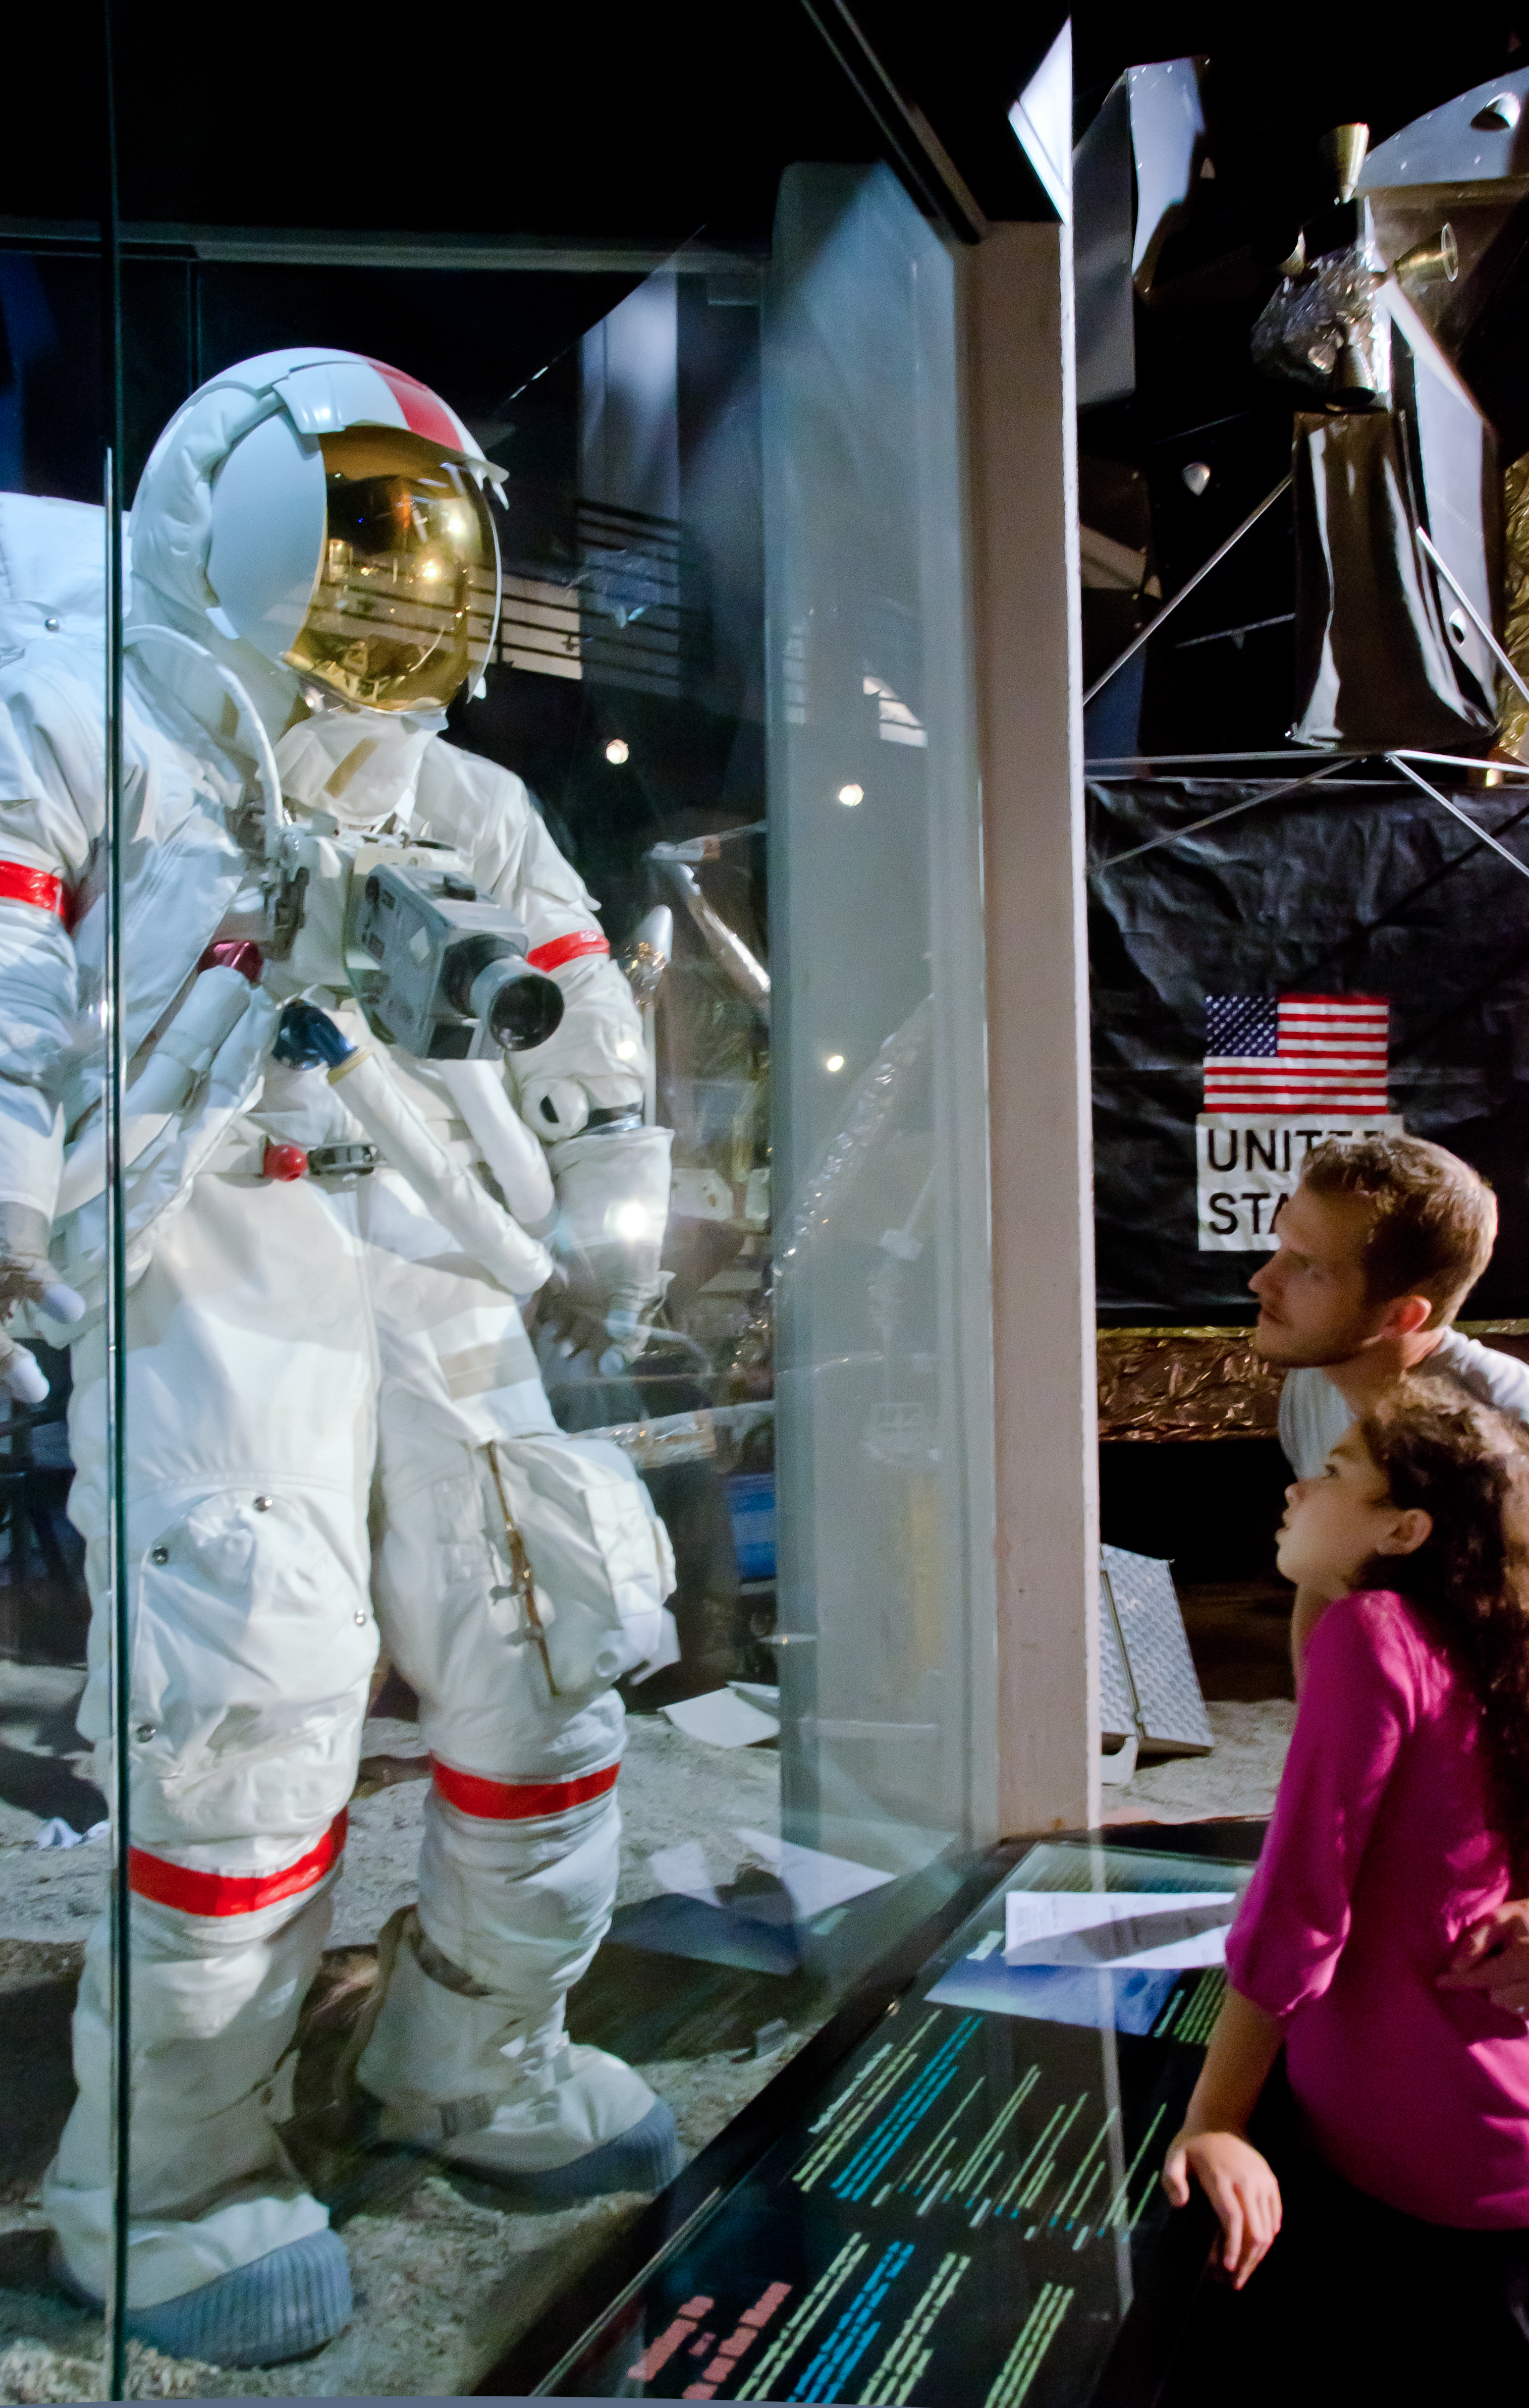 A father and daughter looking at a spacesuit at the Cosmosphere in Hutchinson